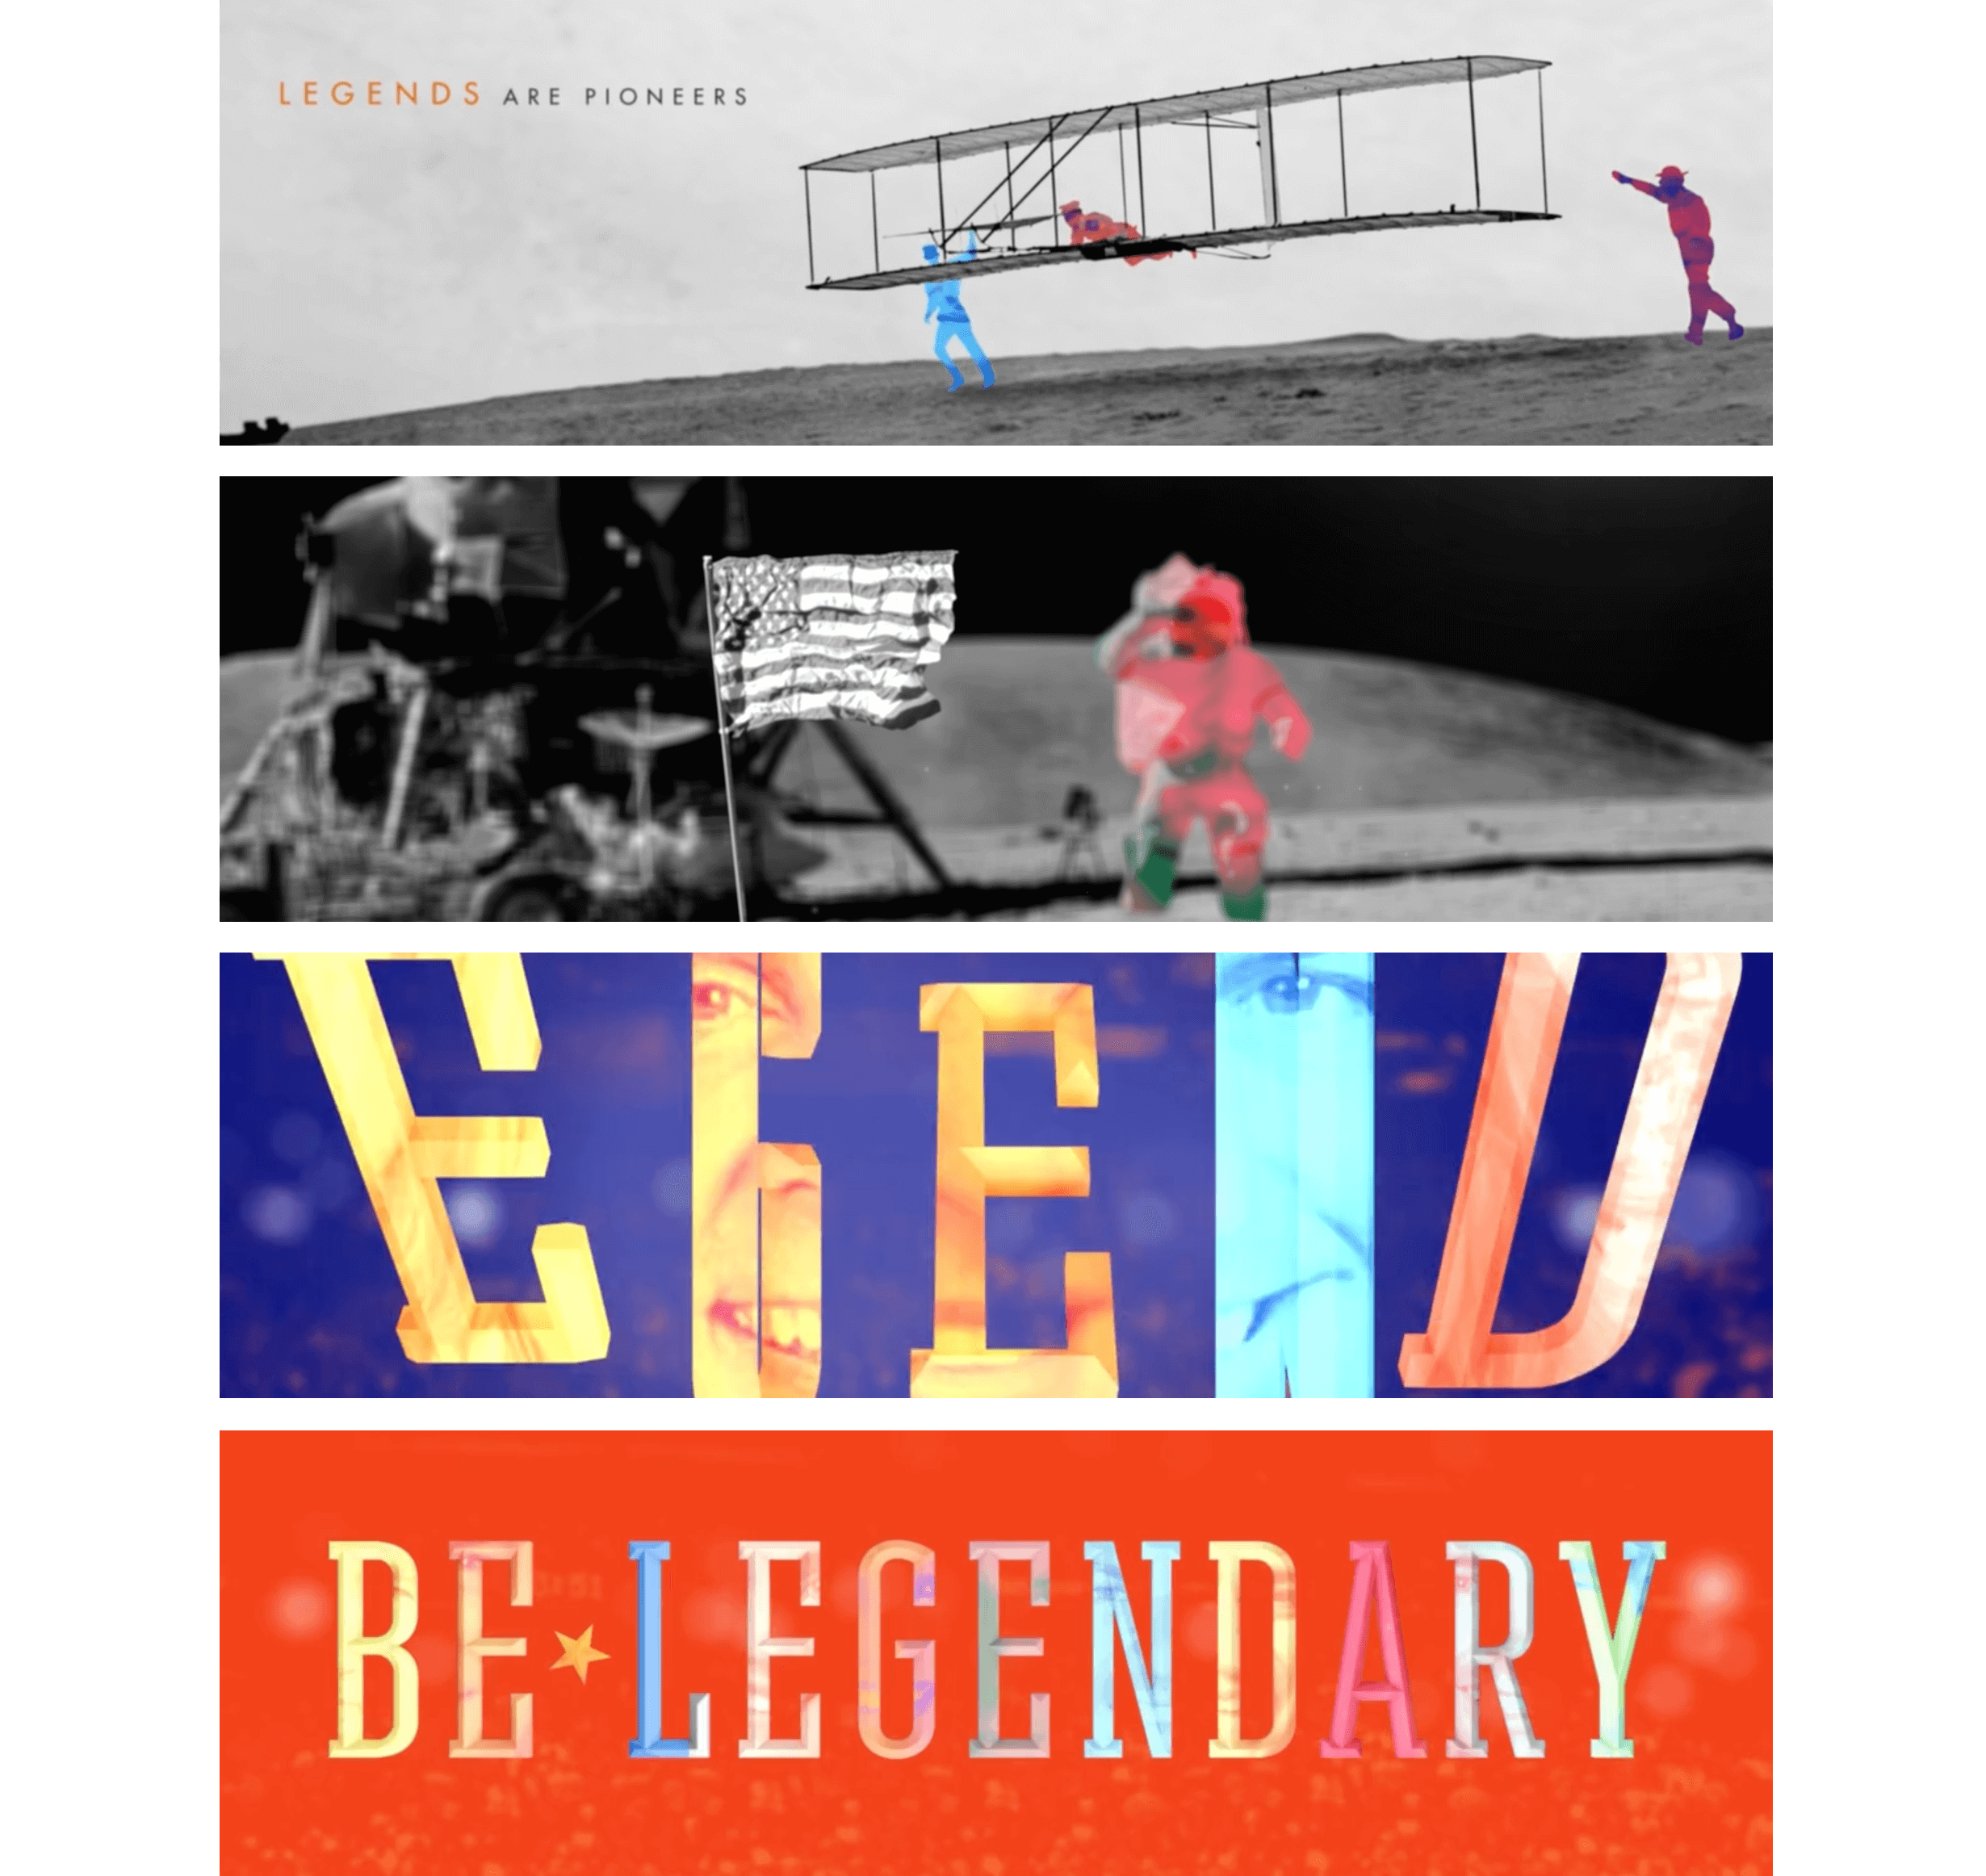 Screens of Be Legendary intro video motion design for EO Nerve conference, Nashville, Tennessee